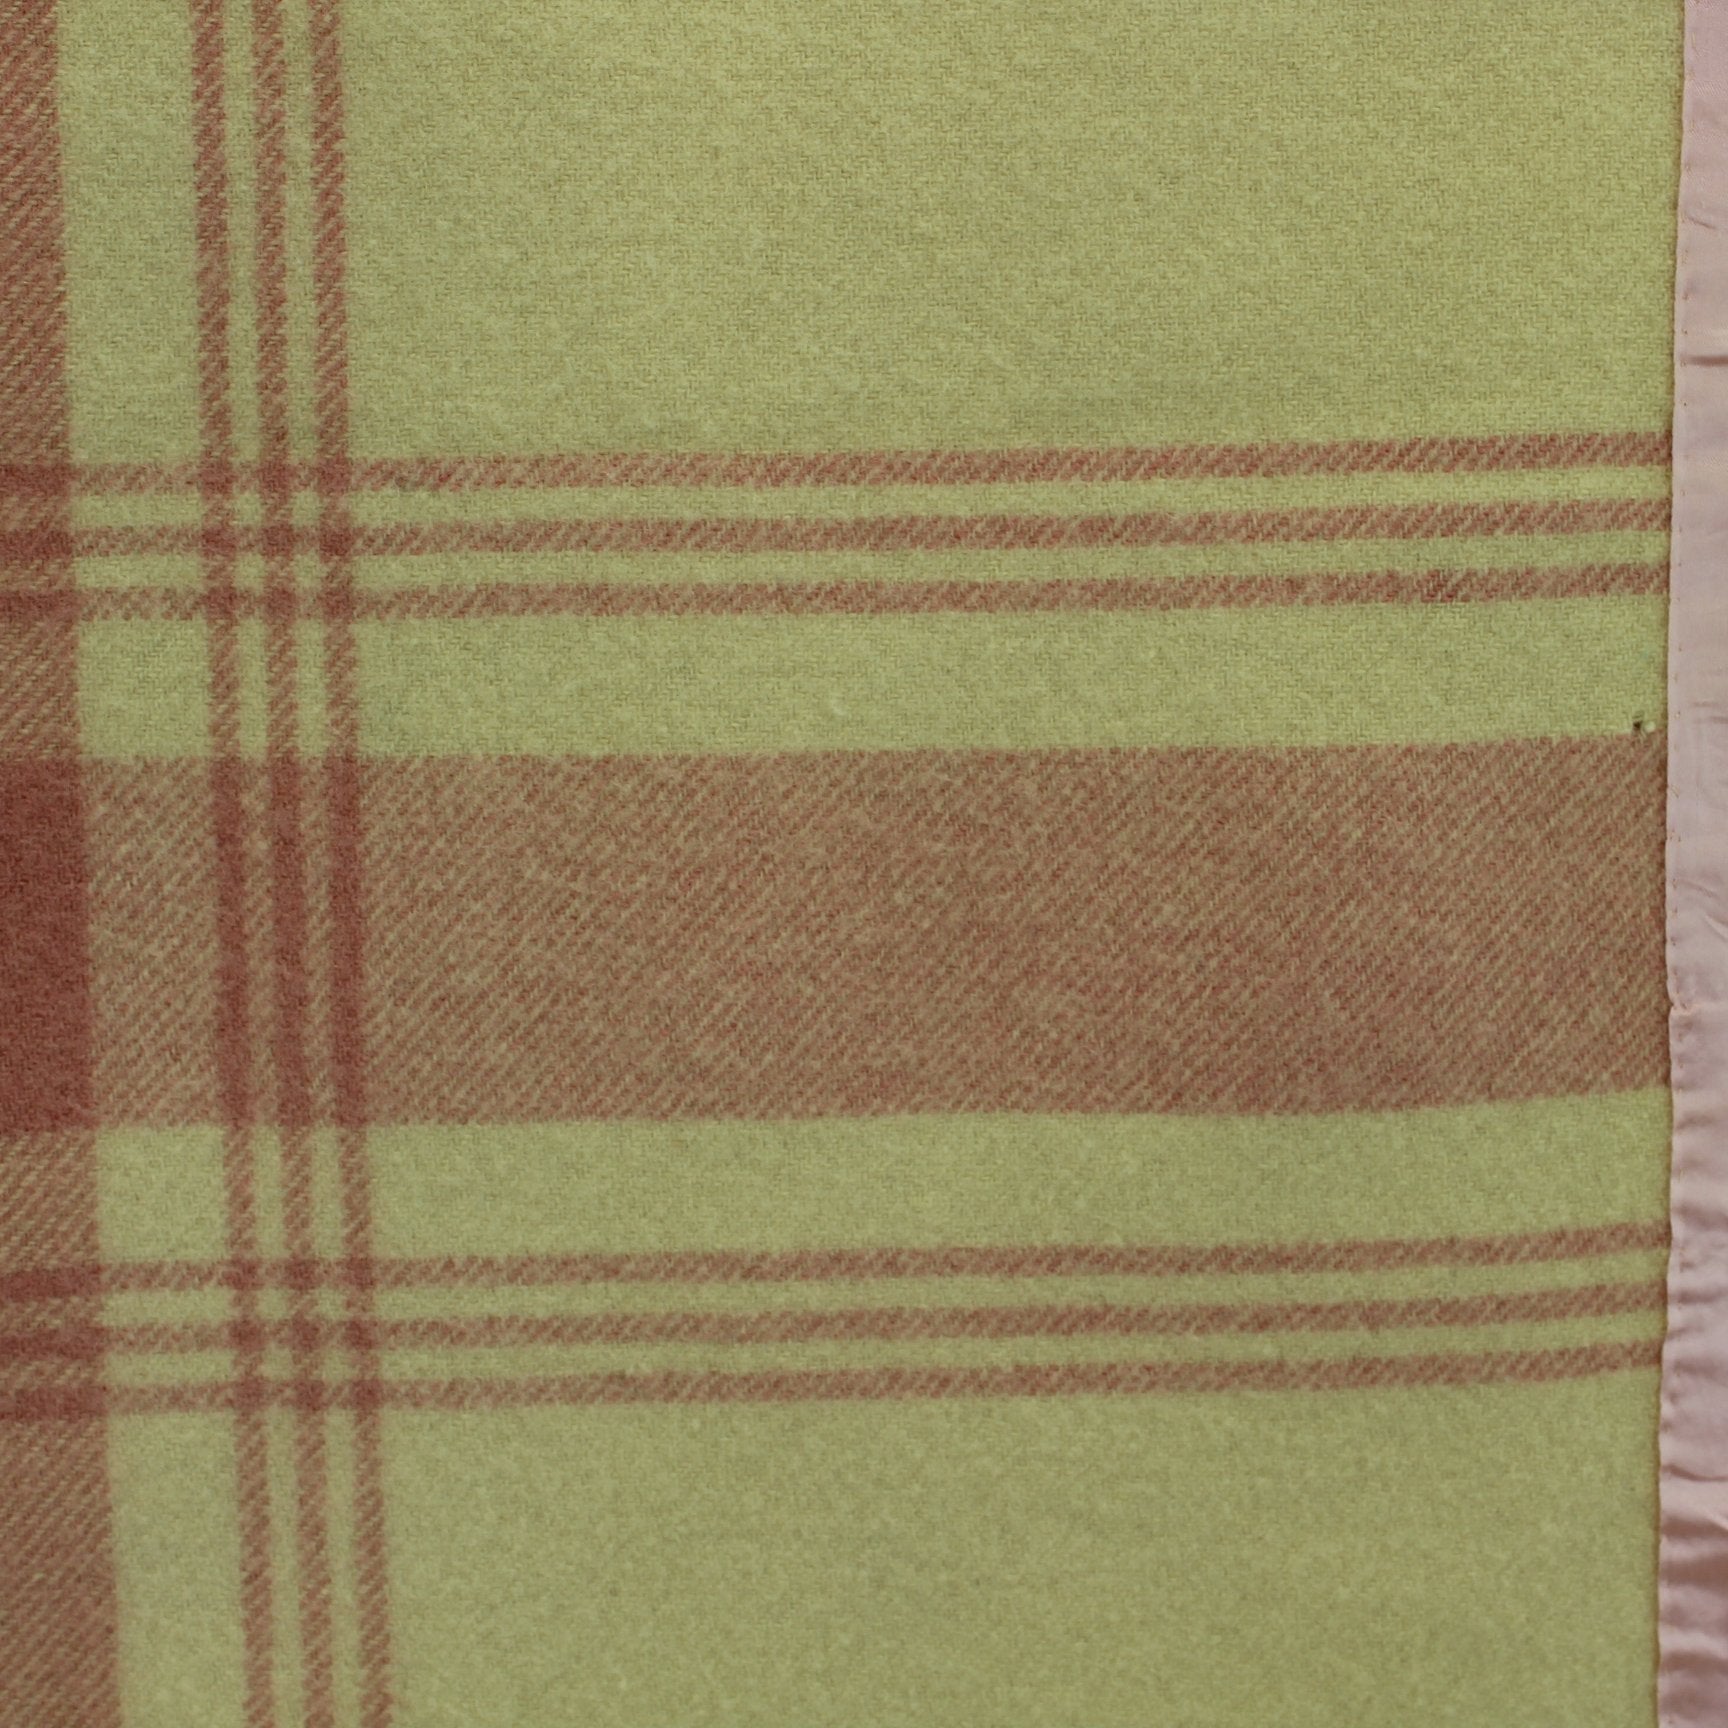 All Seasons Light Medium Cabin Style Wool Blanket Cream Pink Stripes Late 1940s closeup note small hole at binding